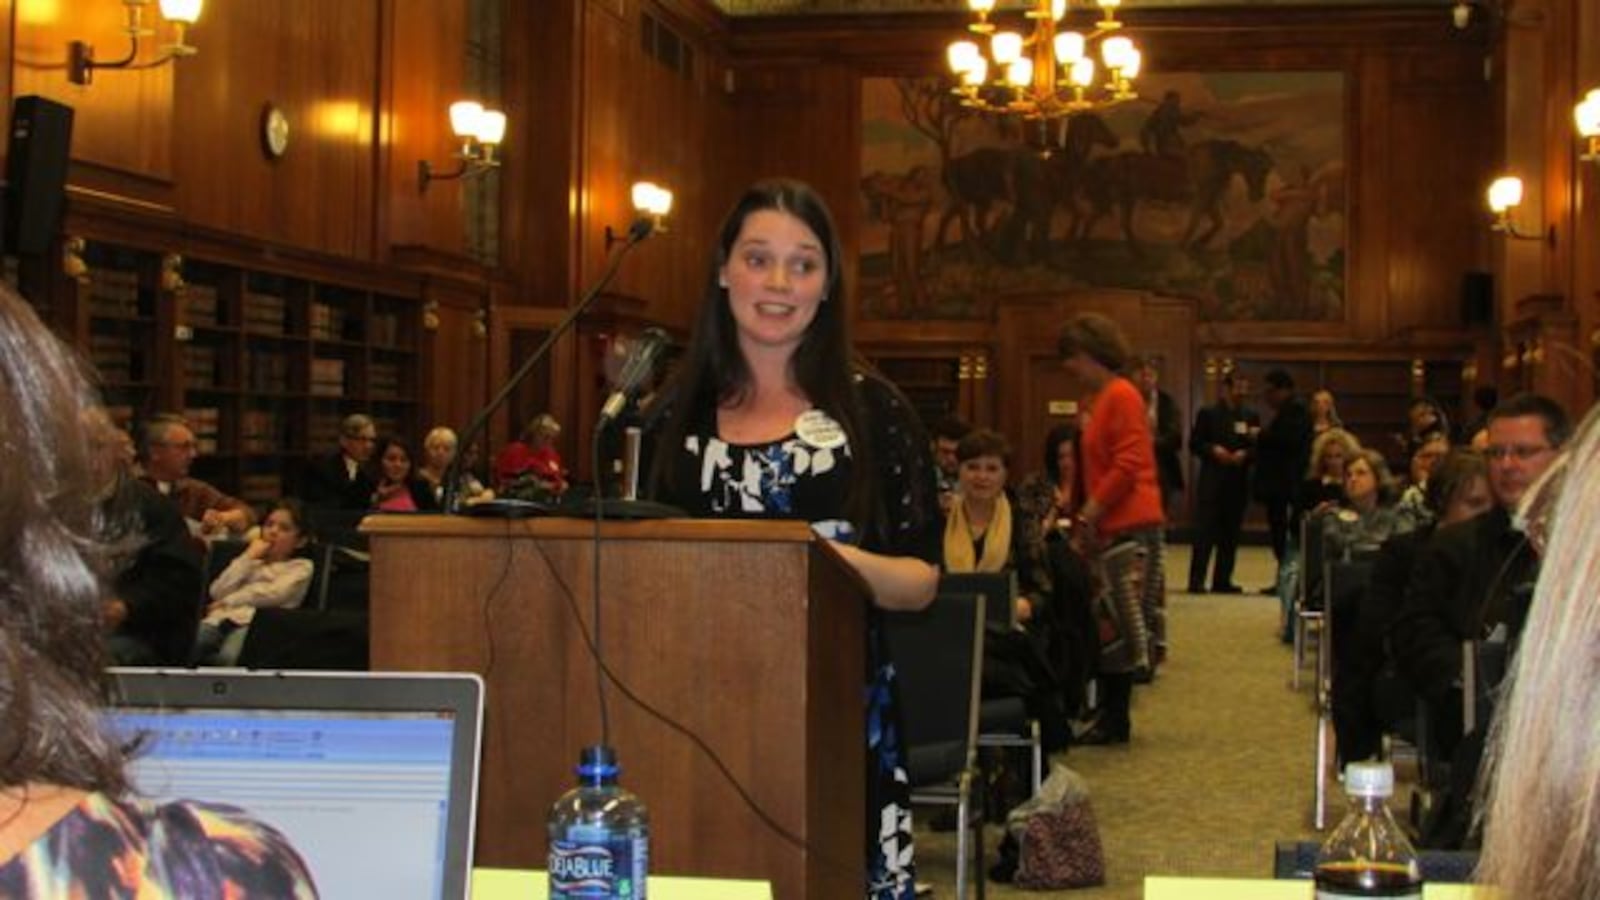 Emily Camenisch came from more than two hours from Corydon to tell state board members draft standards were too much like Common Core standards at the Indiana State Library. (Scott Elliott)